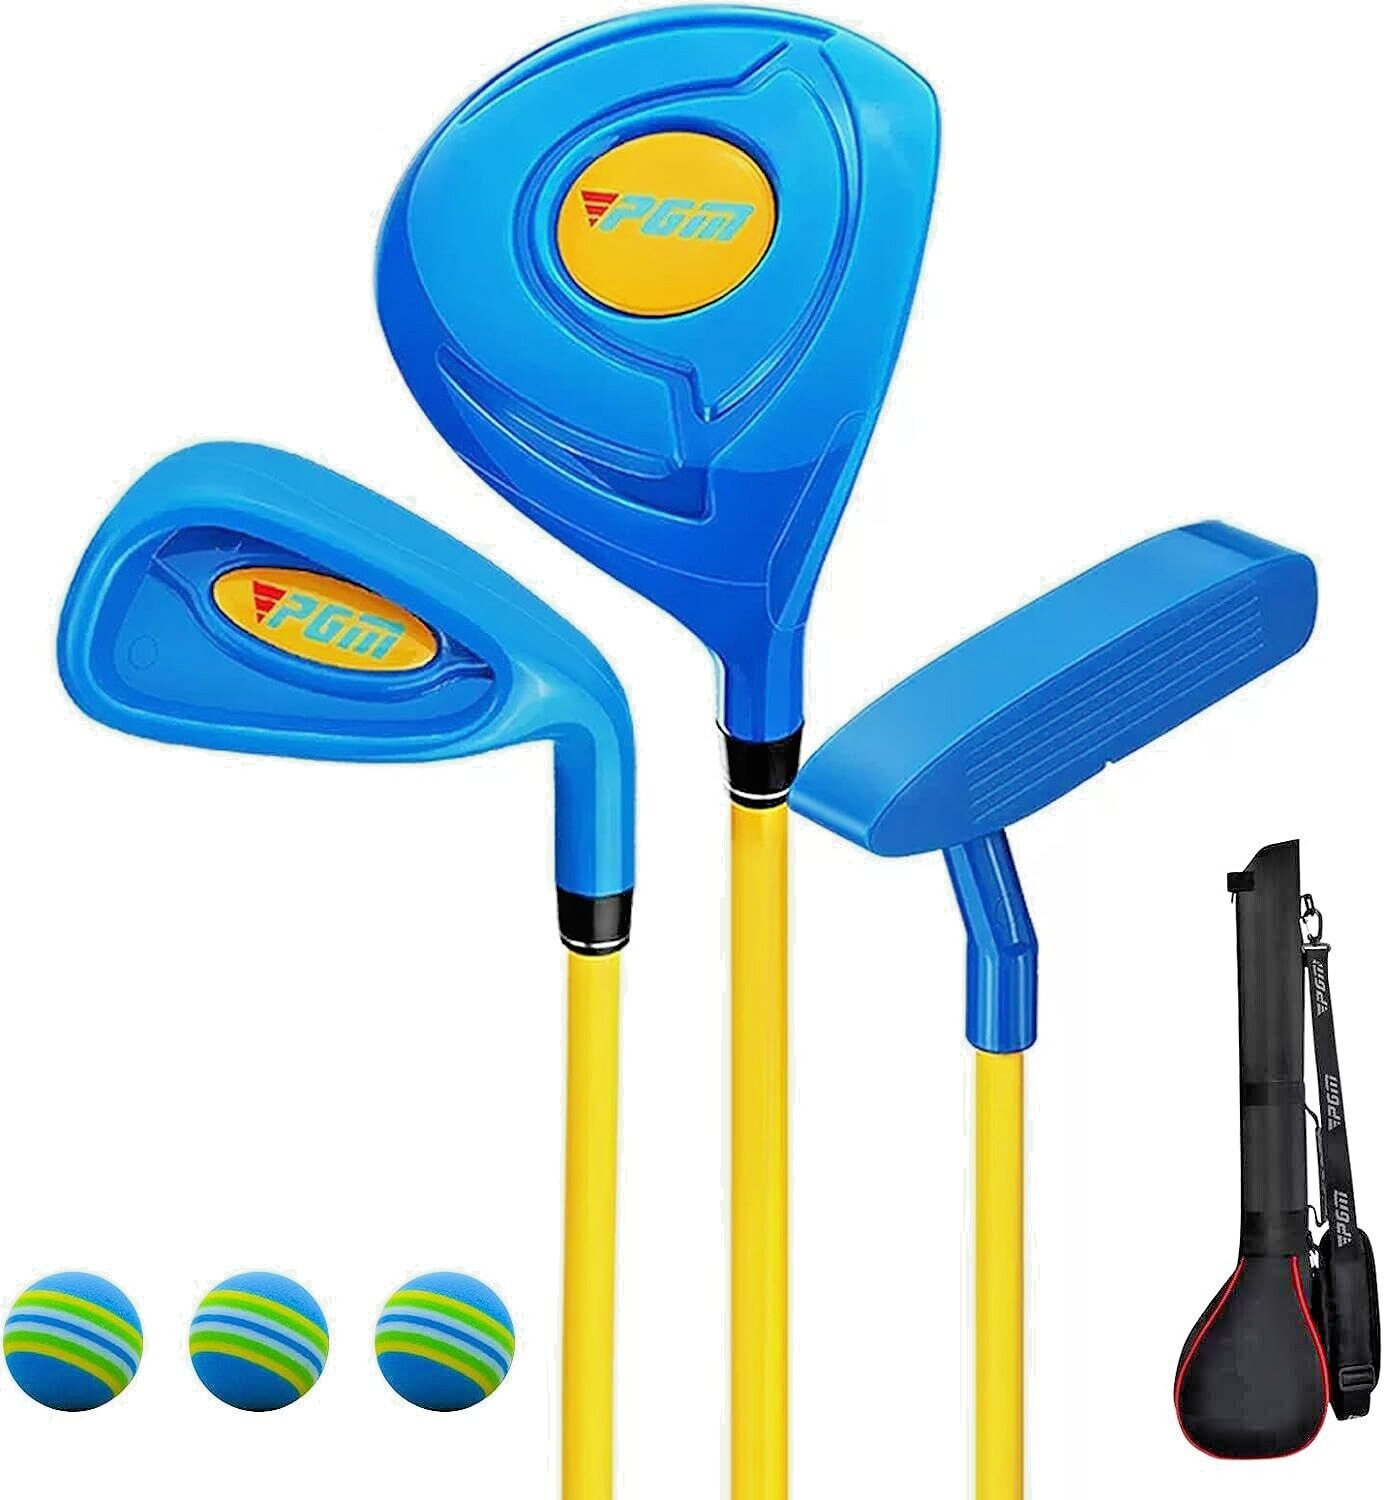 PGM Children\'s Golf Club Set - Can Hit Real Balls, Includes Wood, Iron, and 